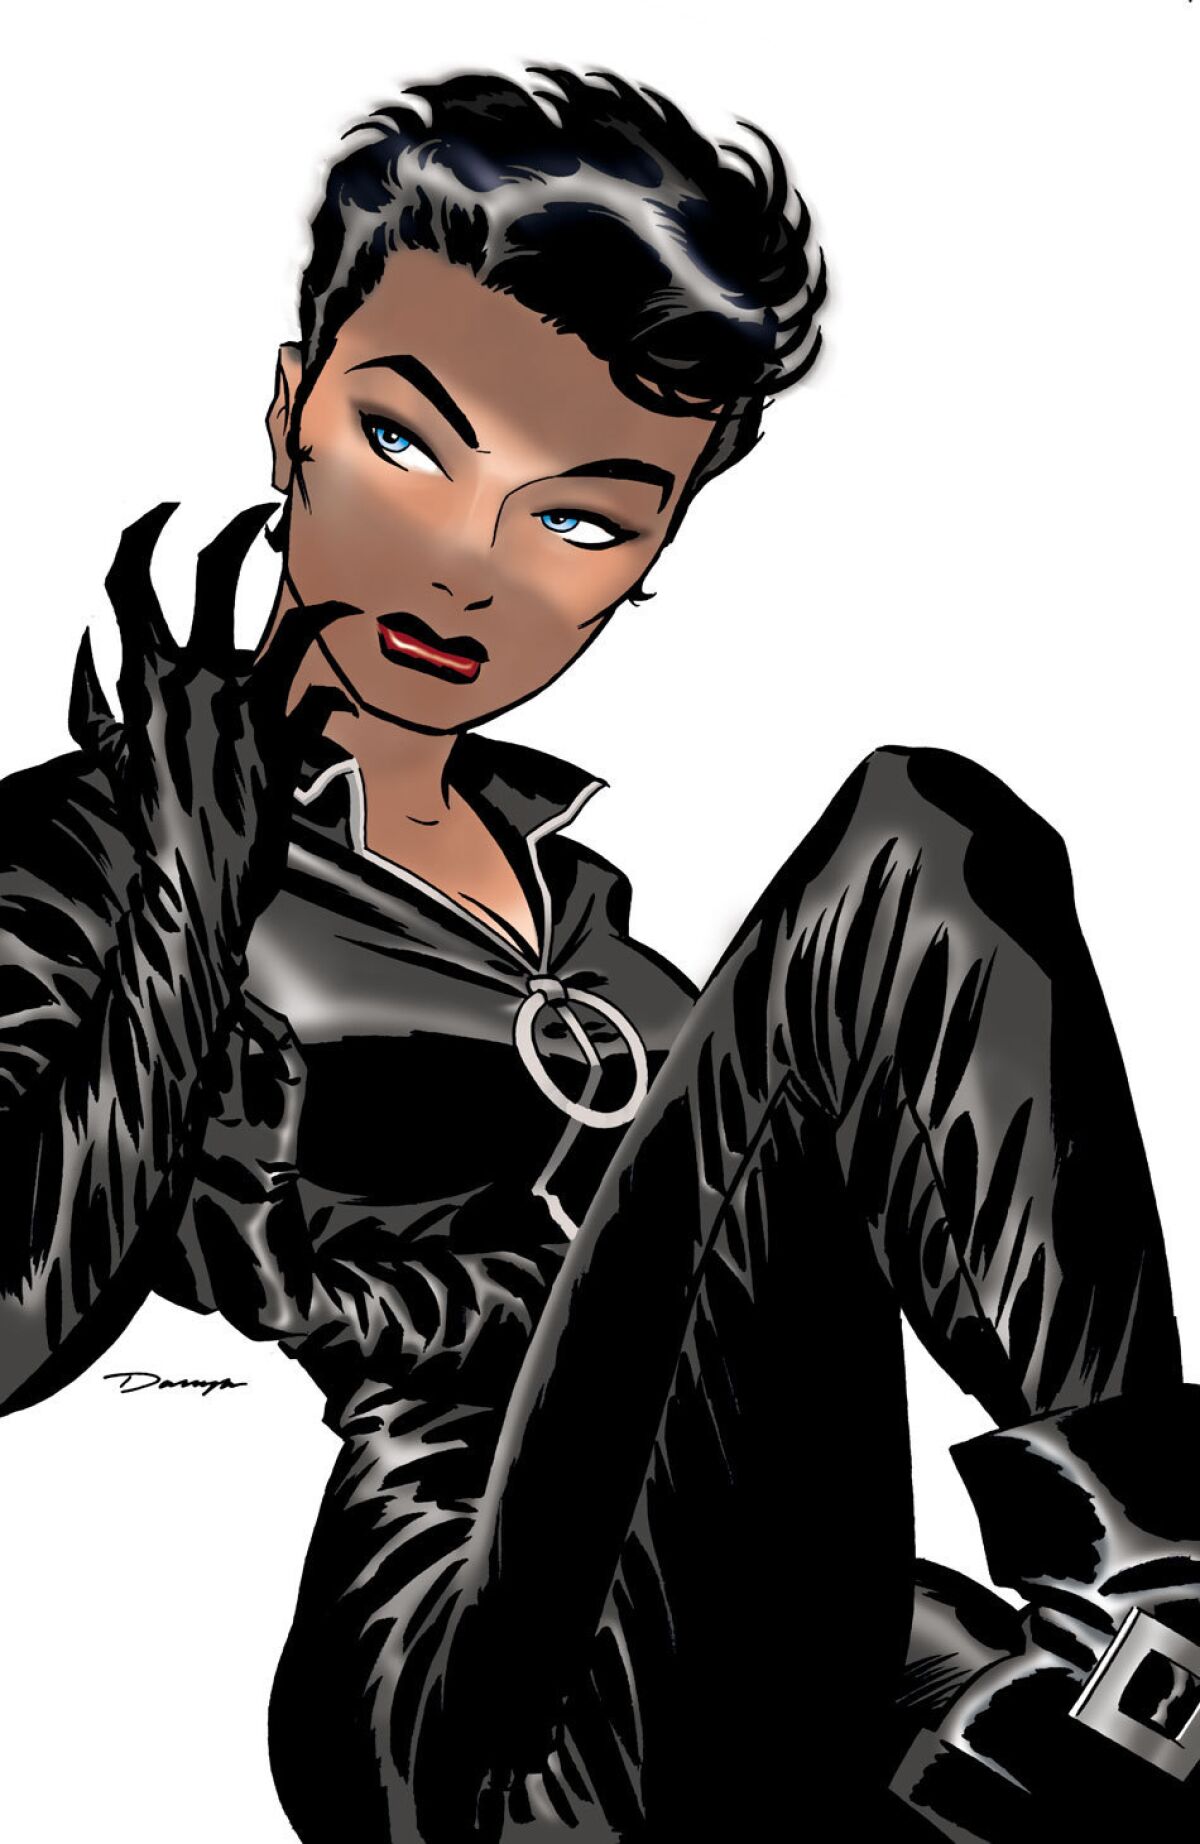 "Catwoman Vol. 1: Trail of the Catwoman" (Darwyn Cooke / DC Comics)